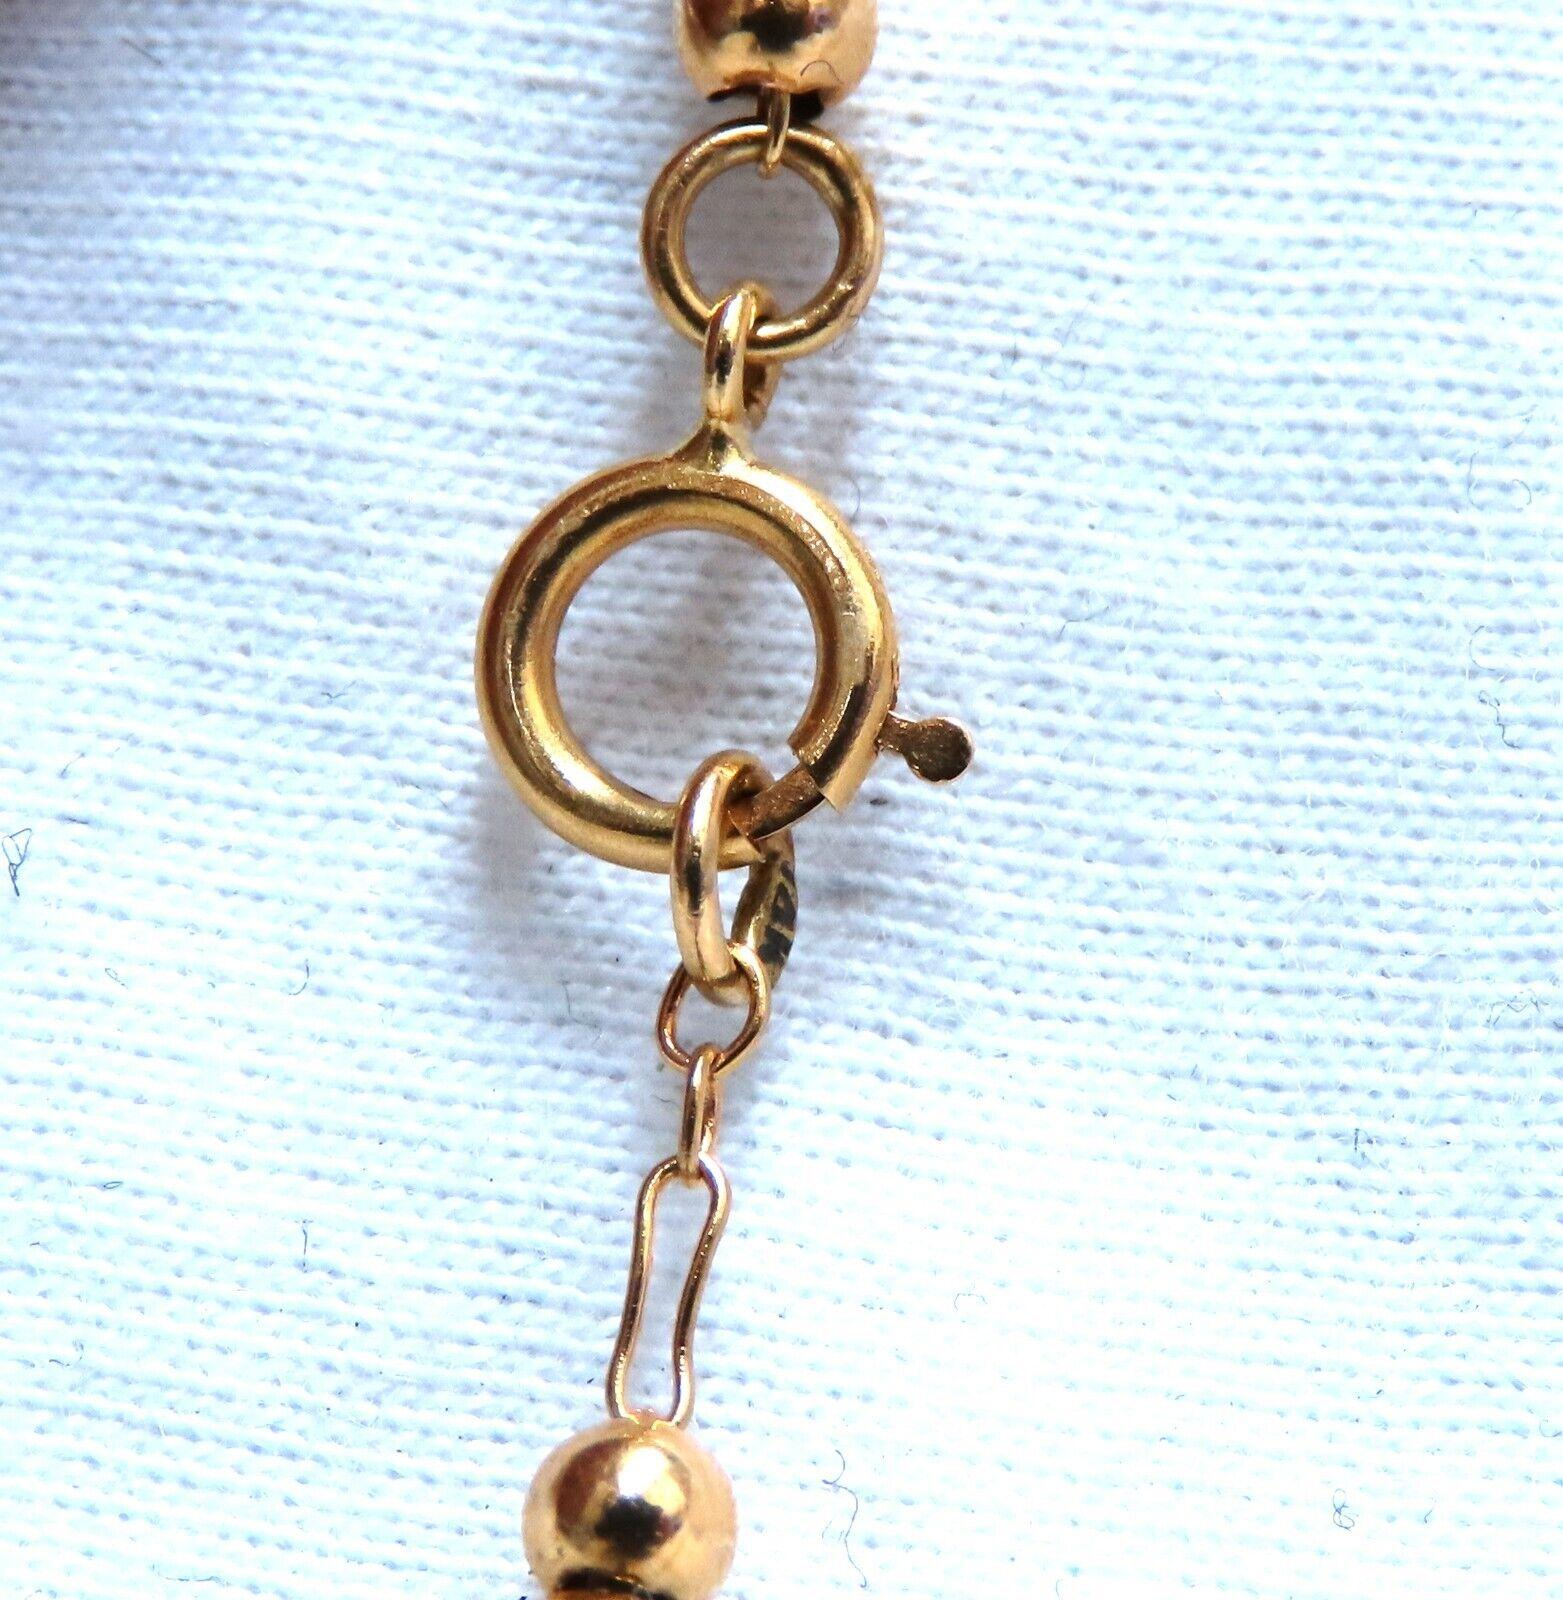 Vintage Tube and Ball Necklace

16 Inches Necklace:

Caliber 2.5mm Wide 

14kt. yellow gold 

6 Grams.

Comfortable Lobster Clasp Locking